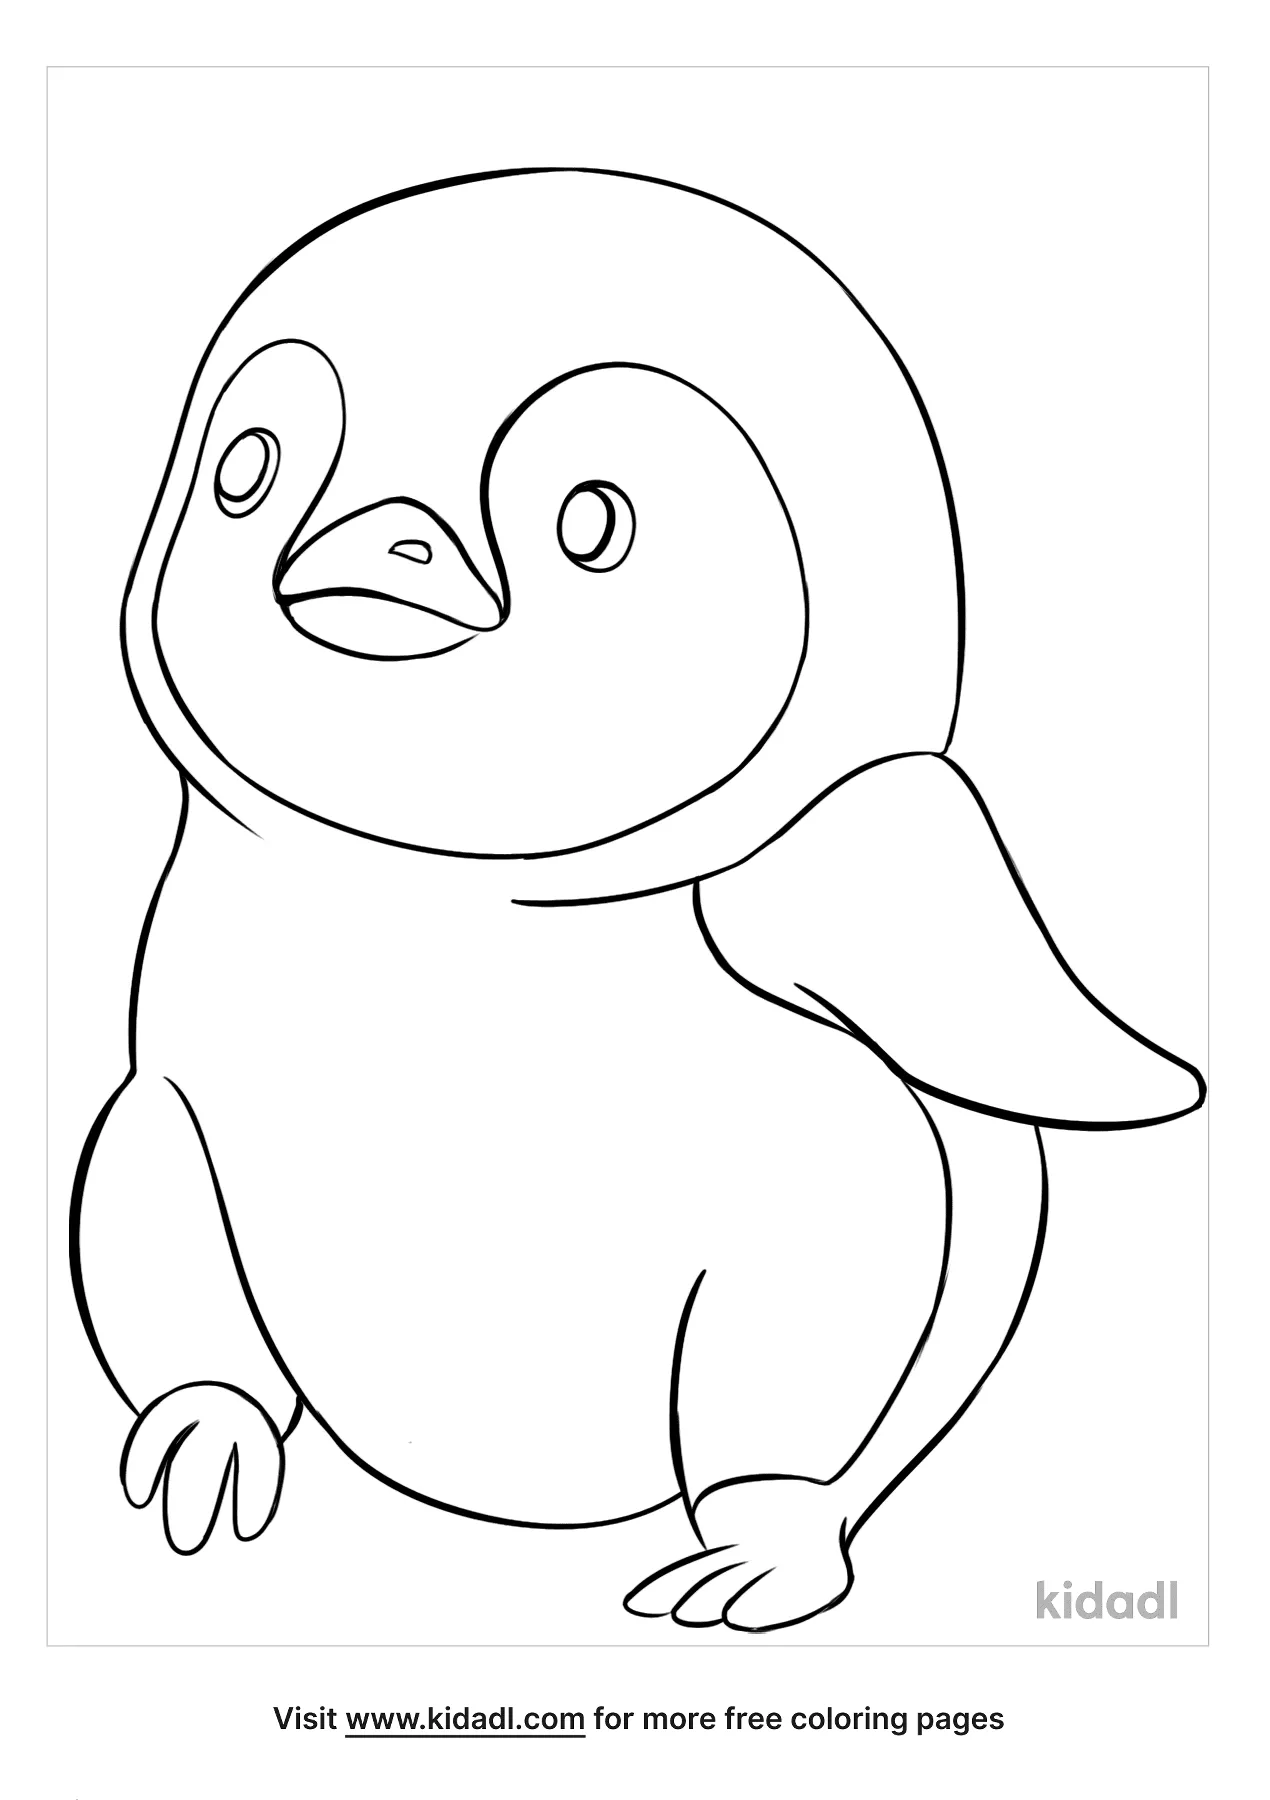 Baby Penguin Coloring Pages   Free Animals Coloring Pages   Kidadl